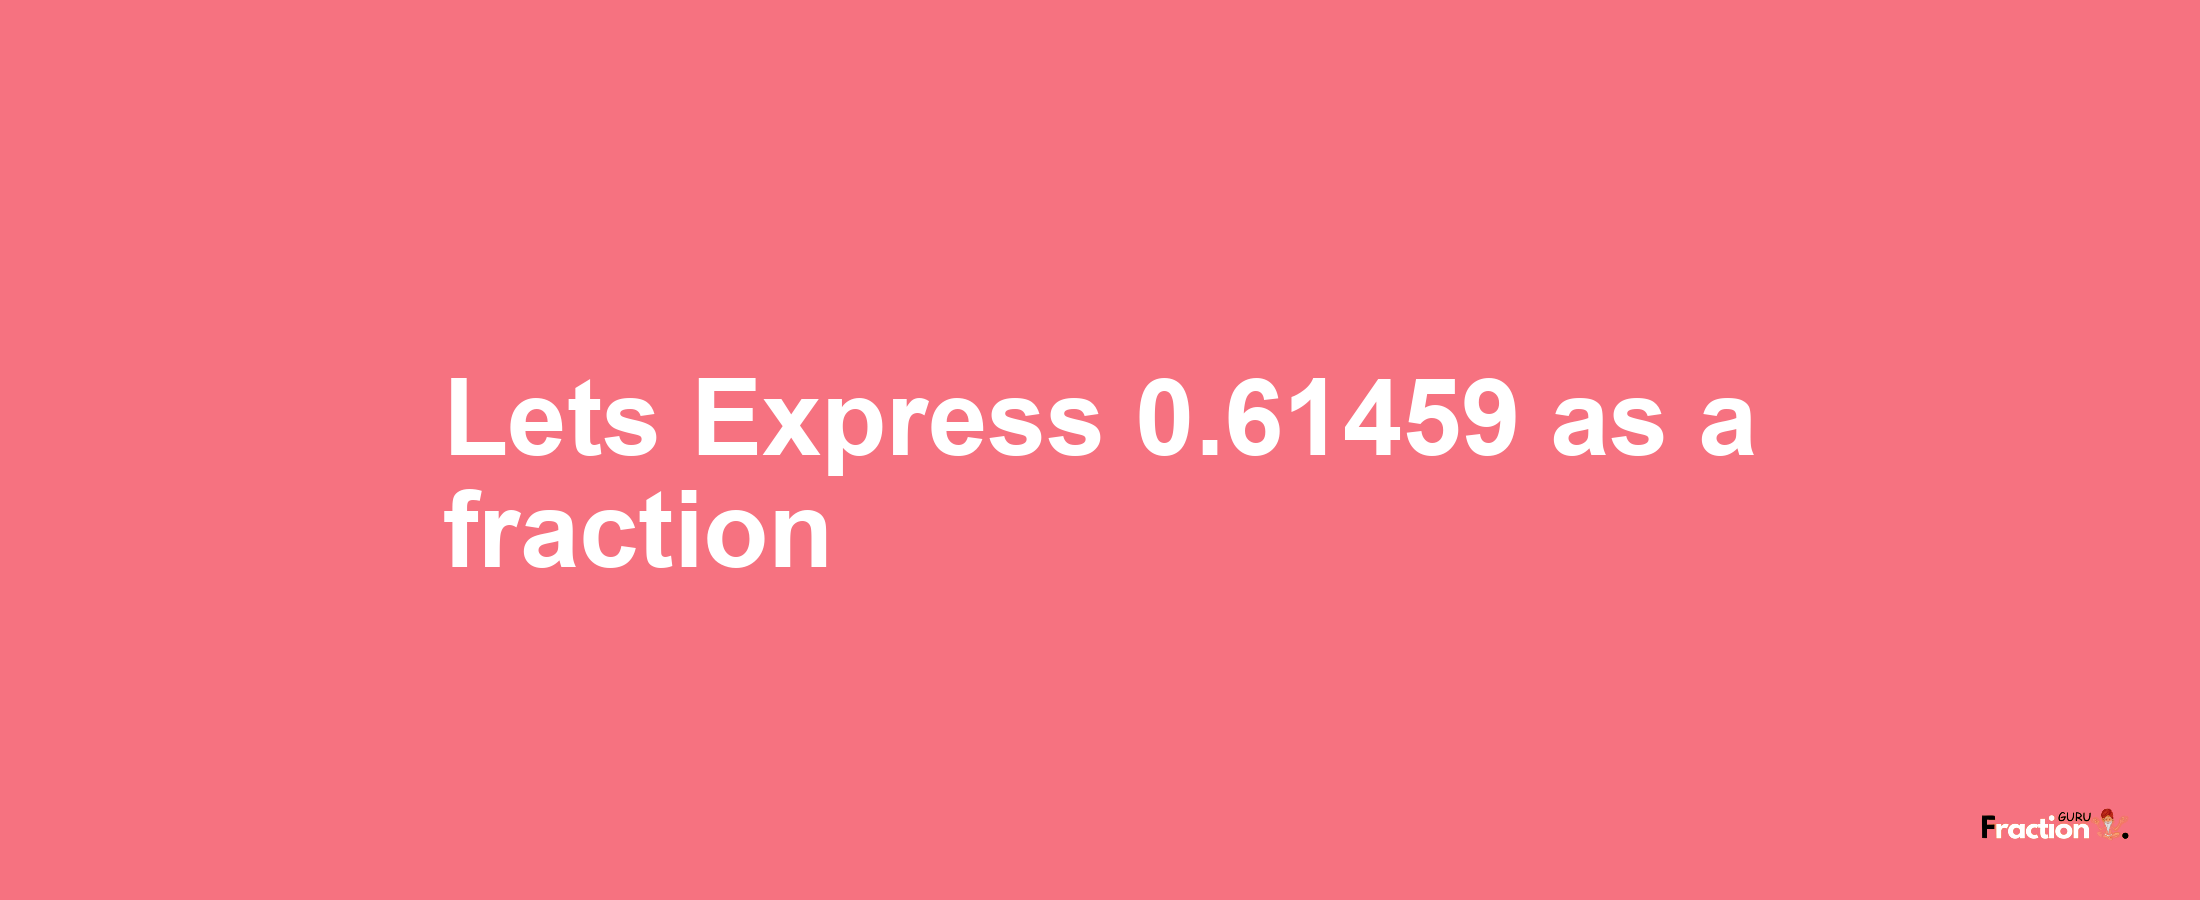 Lets Express 0.61459 as afraction